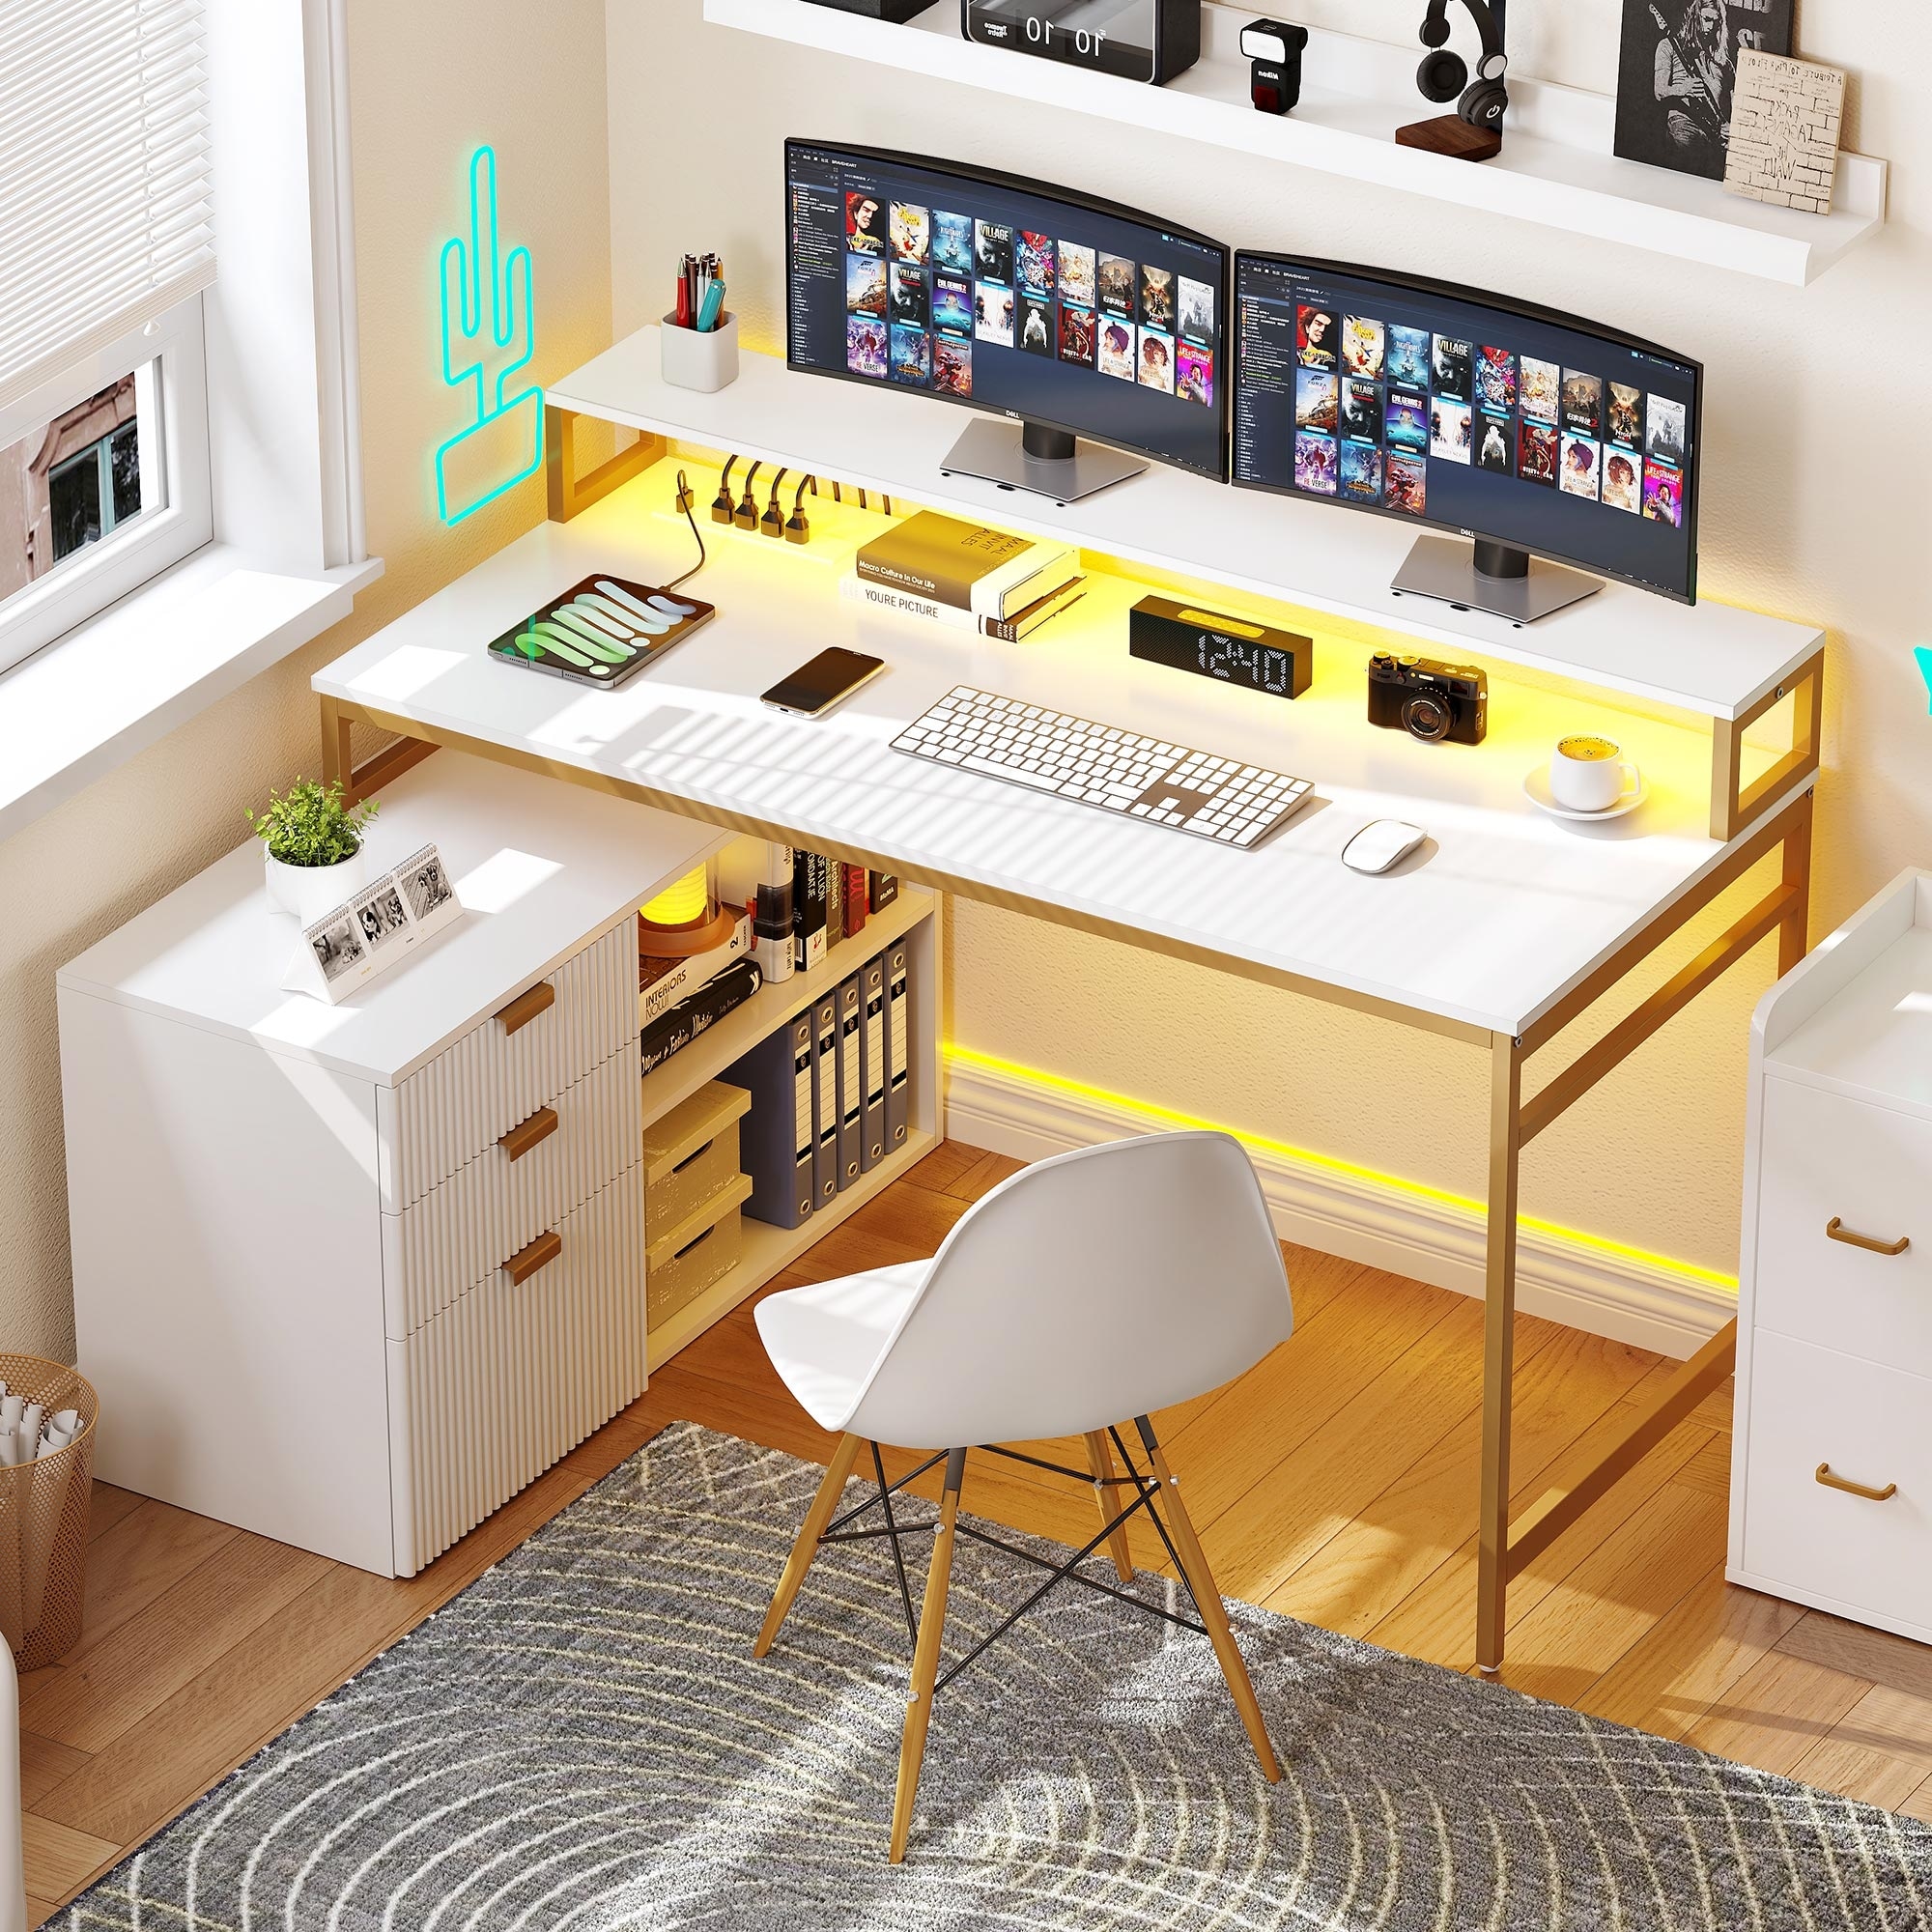 https://ak1.ostkcdn.com/images/products/is/images/direct/97abdd7bd6057d156f5b11be03ce5b66d5c61b0c/55-Inch-L-shaped-Desk-with-Power-Outlets-and-LED-Lights-Computer-Corner-Desk-with-File-Cabinet-Monitor-Stand.jpg